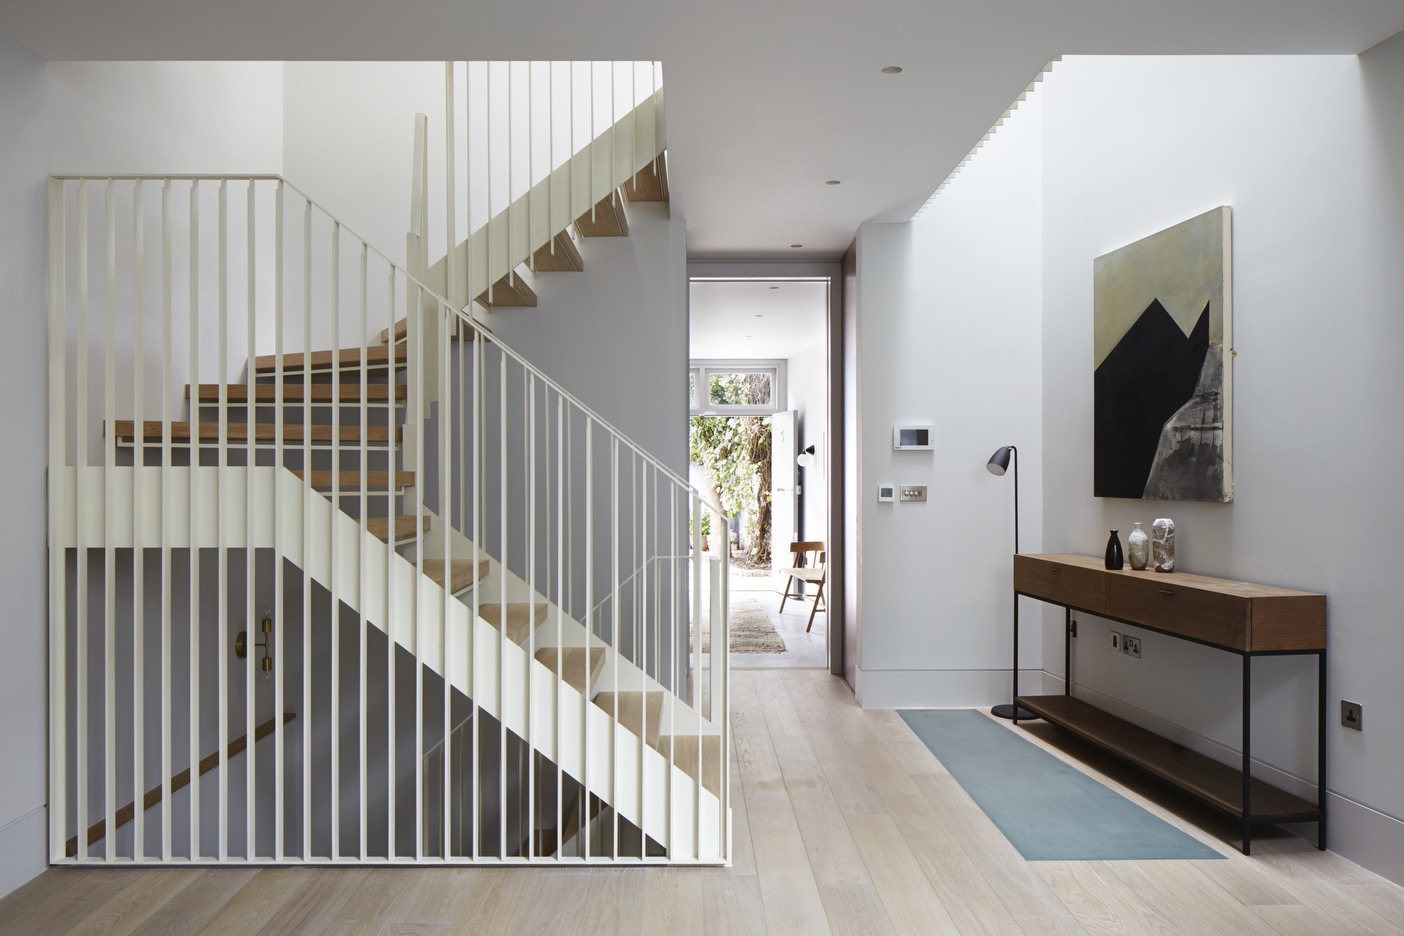 </p> <p>Find your ideal home design pro on designfor-me.com - get matched and see who's interested in your home project. Click image to see more inspiration from our design pros</p> <p>Design by Caspar, architect from Lambeth, London</p> <p>#architecture #homedesign #modernhomes #homeinspiration #hallways #hallwaydesign #hallwayinspiration #hallwayideas #hallwaydesignideas #staircases #staircasedesign #staircaseinspiration #staircaseideas #staircasedesignideas </p> <p>